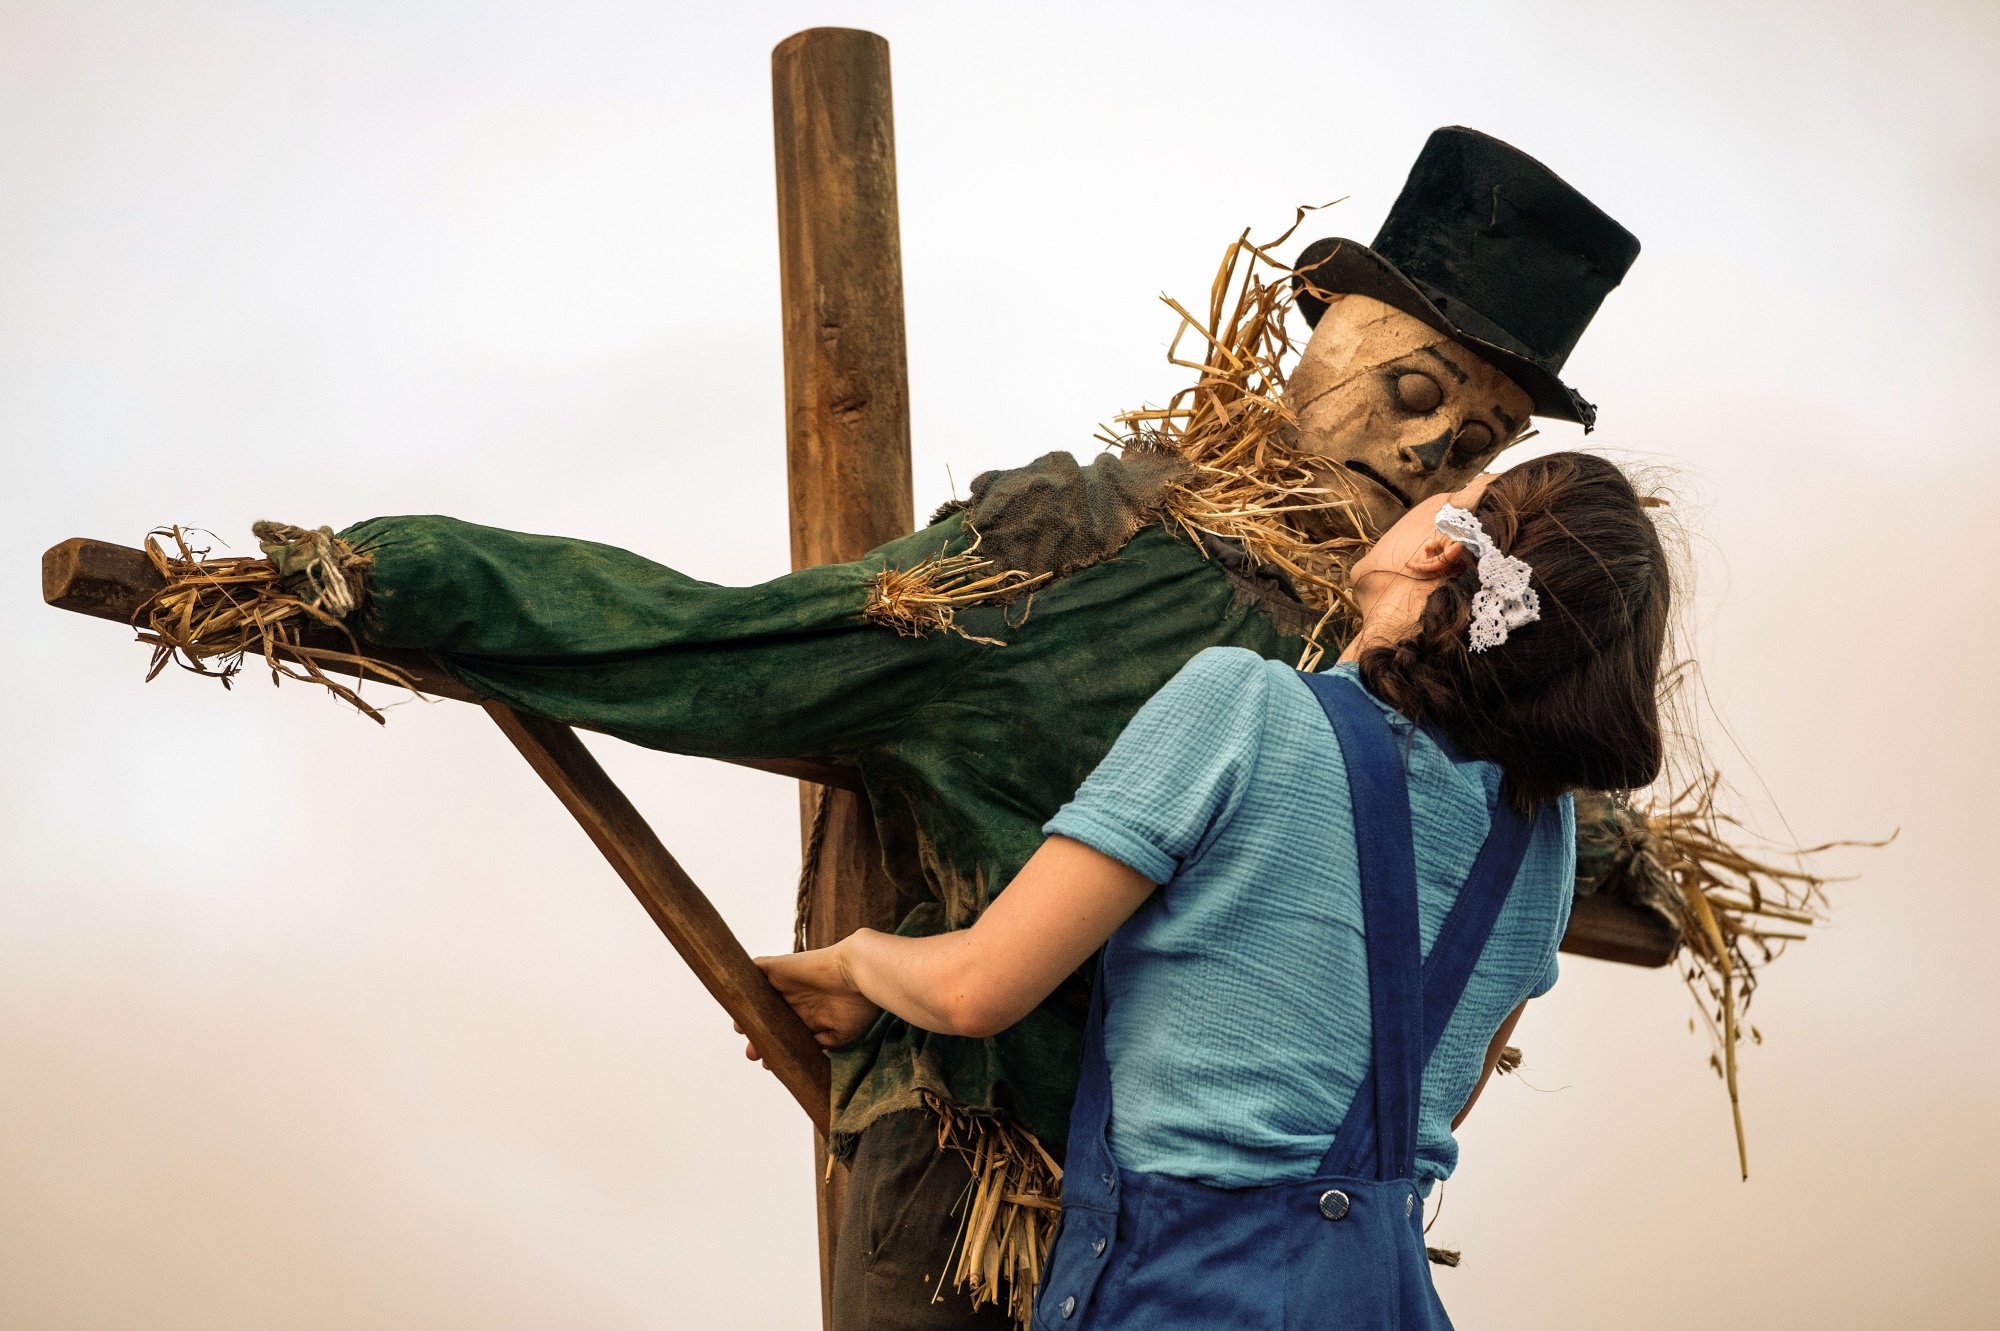 'Pearl' Mia Goth as Pearl with scarecrow climbing on top of a scarecrow cross. A top hat is on top of the scarecrow with her face close to the scarecrow's.